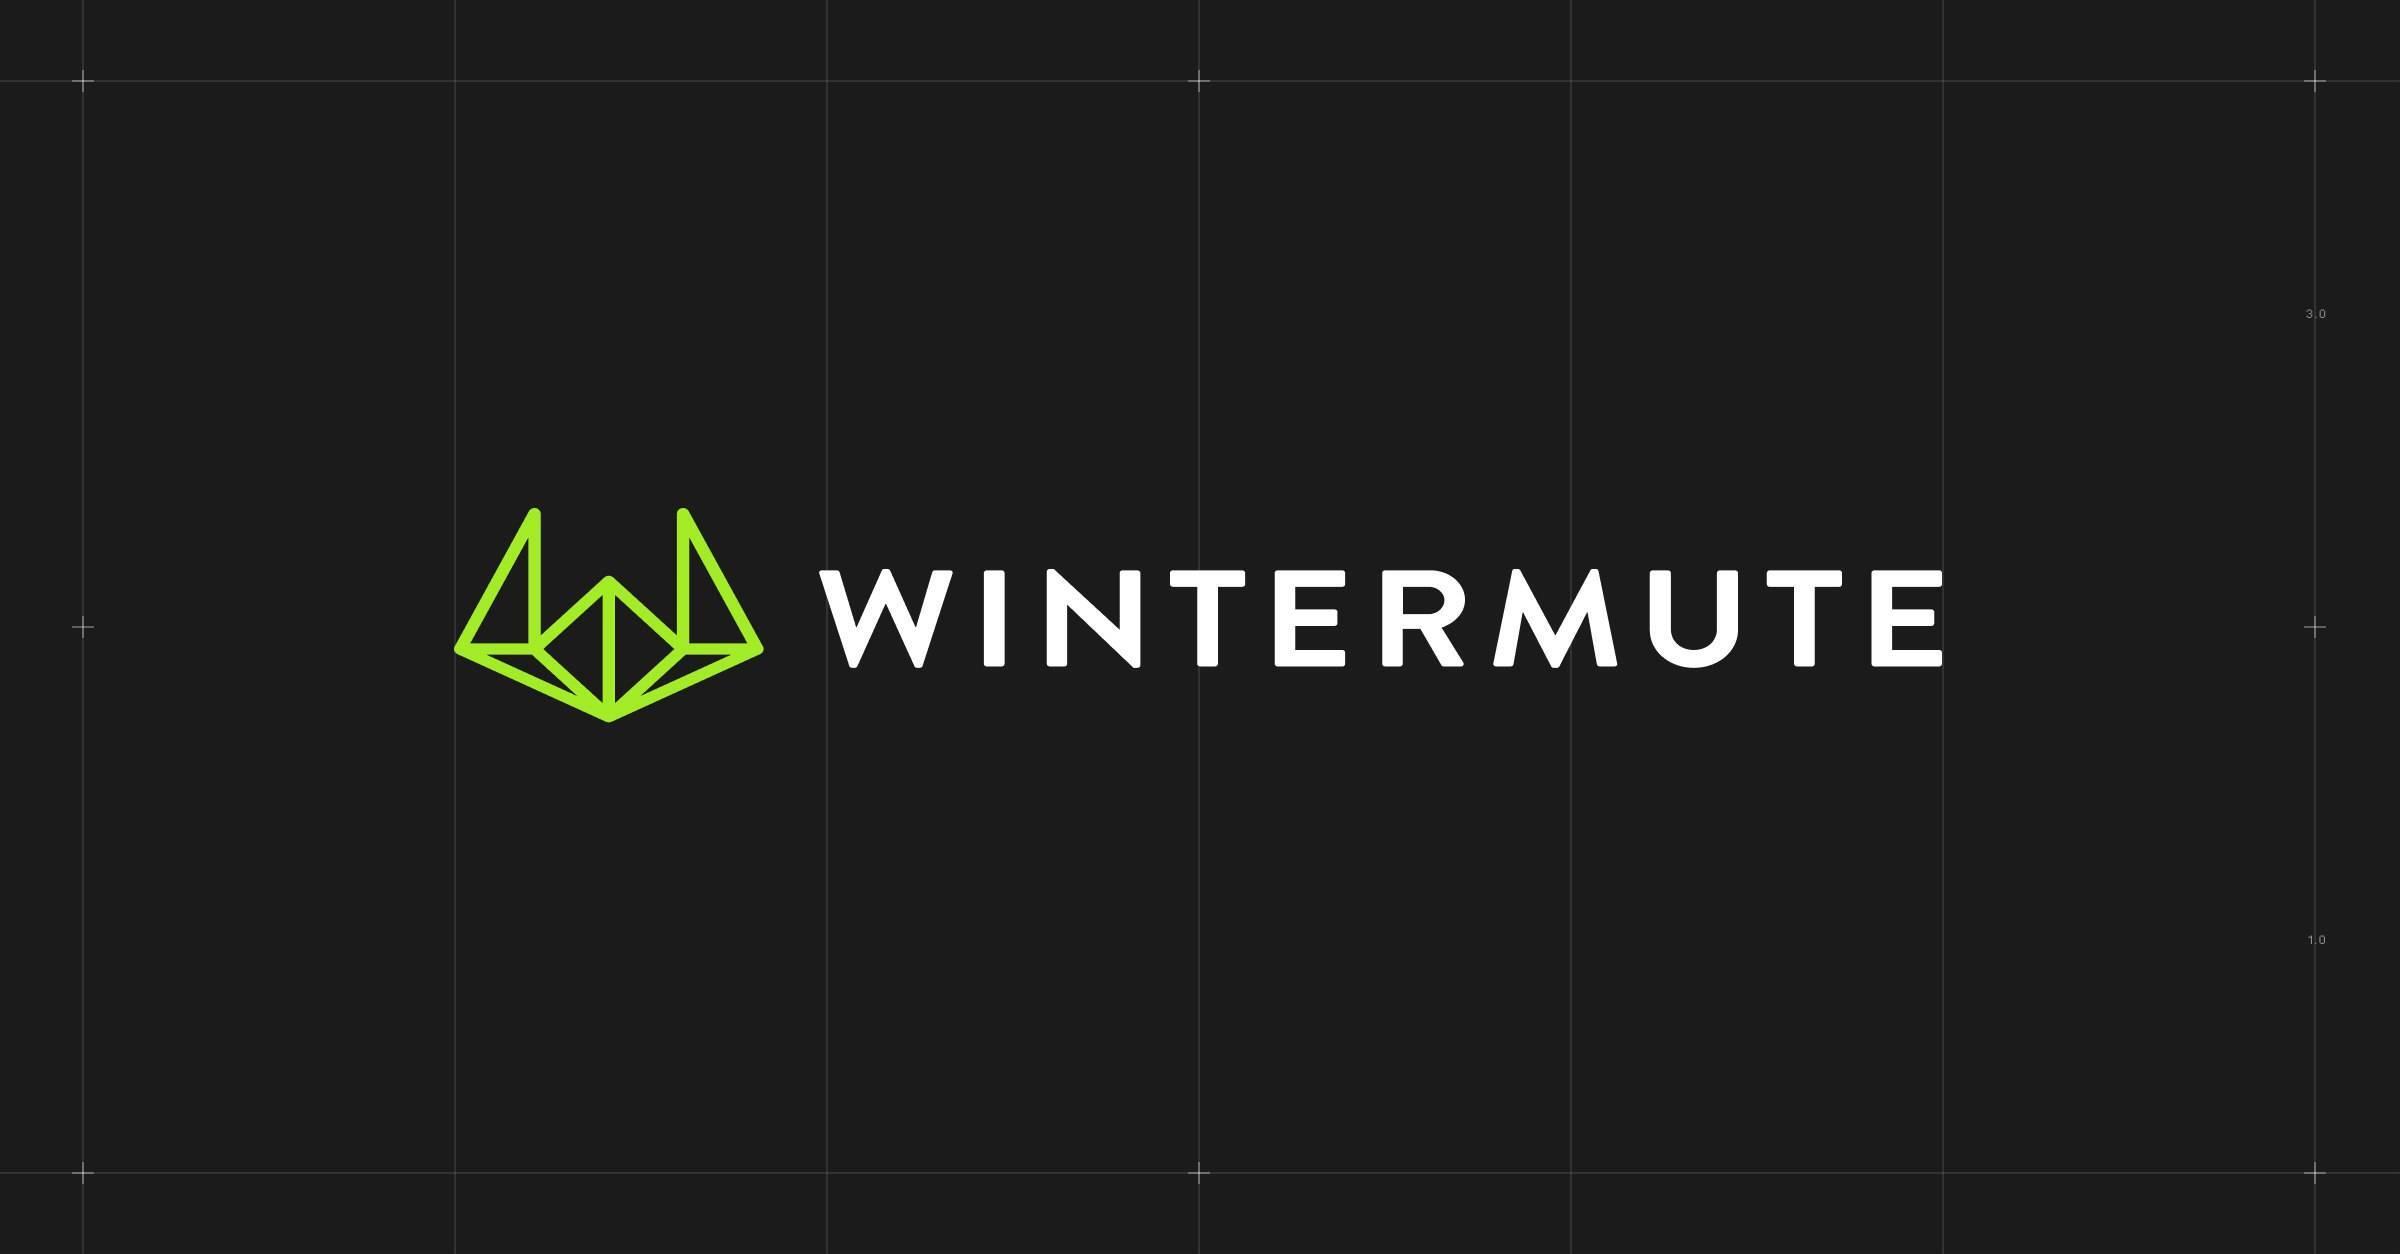 wintermute-muon-huy-dong-them- ...